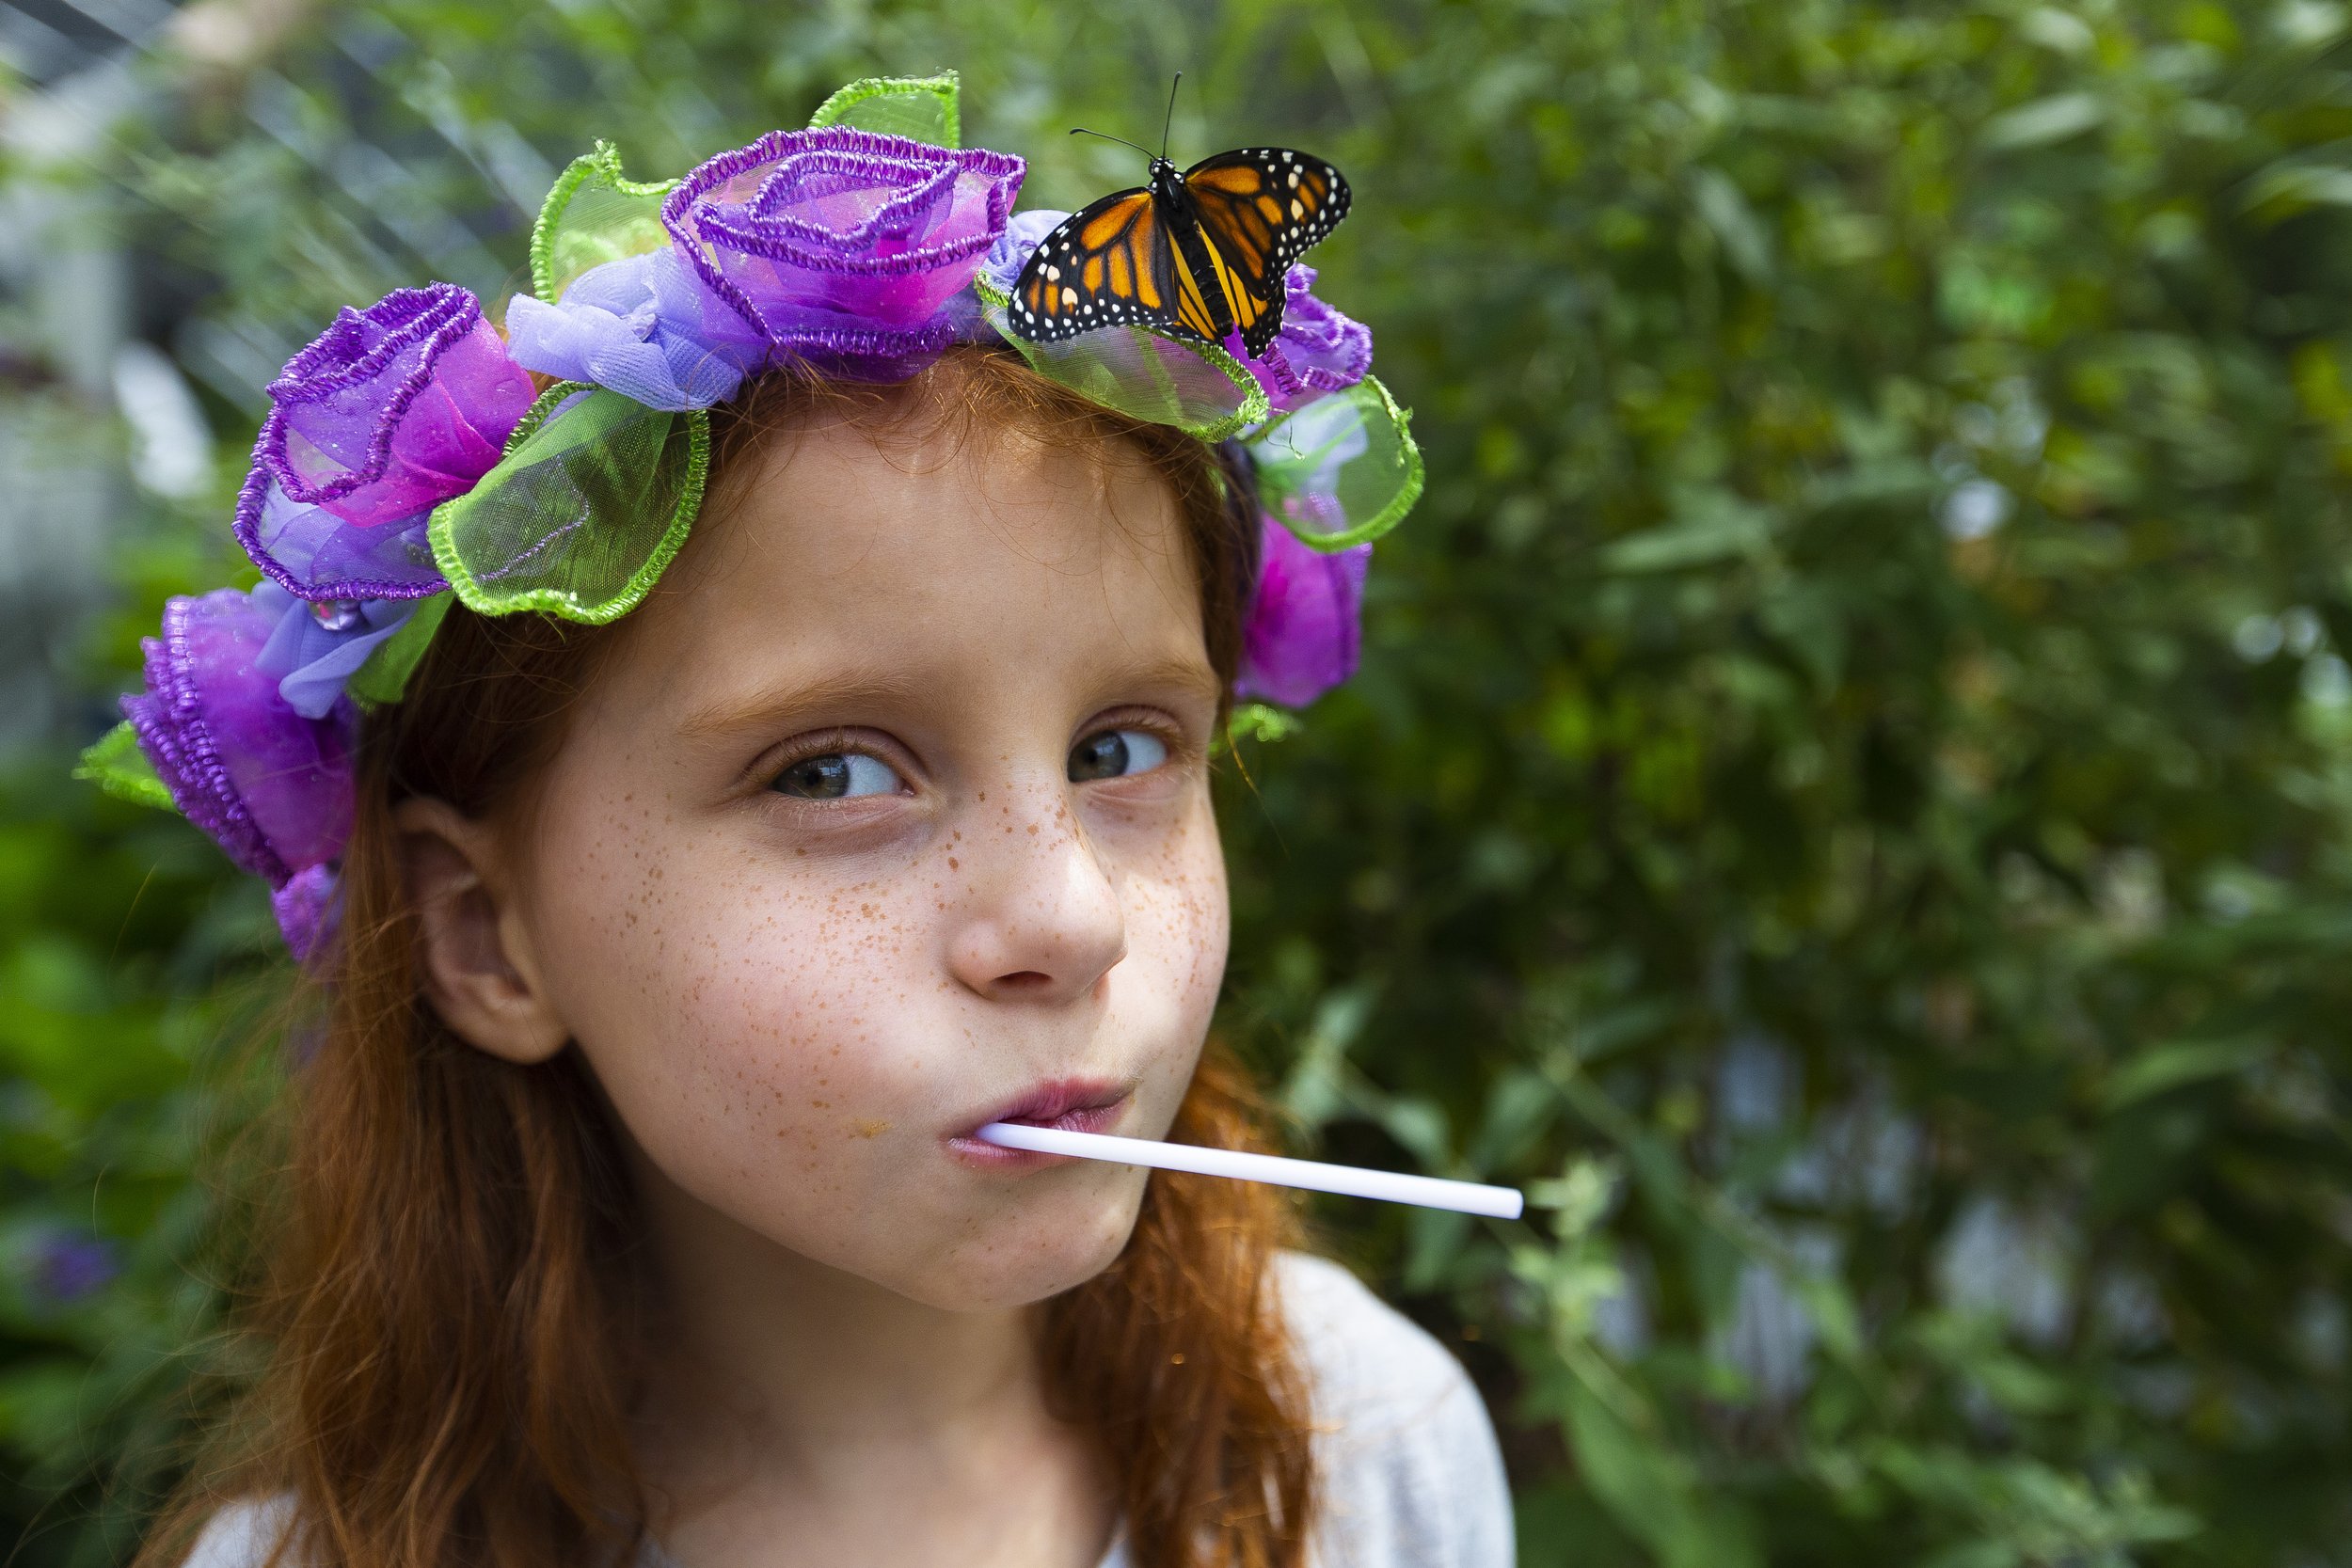  Madeline Parker tries not to move after a Monarch Butterfly lands on her flower crown during a trip inside of the flight house at All-A-Flutter Farms in High Point, N.C., on Saturday, August 7, 2021.     